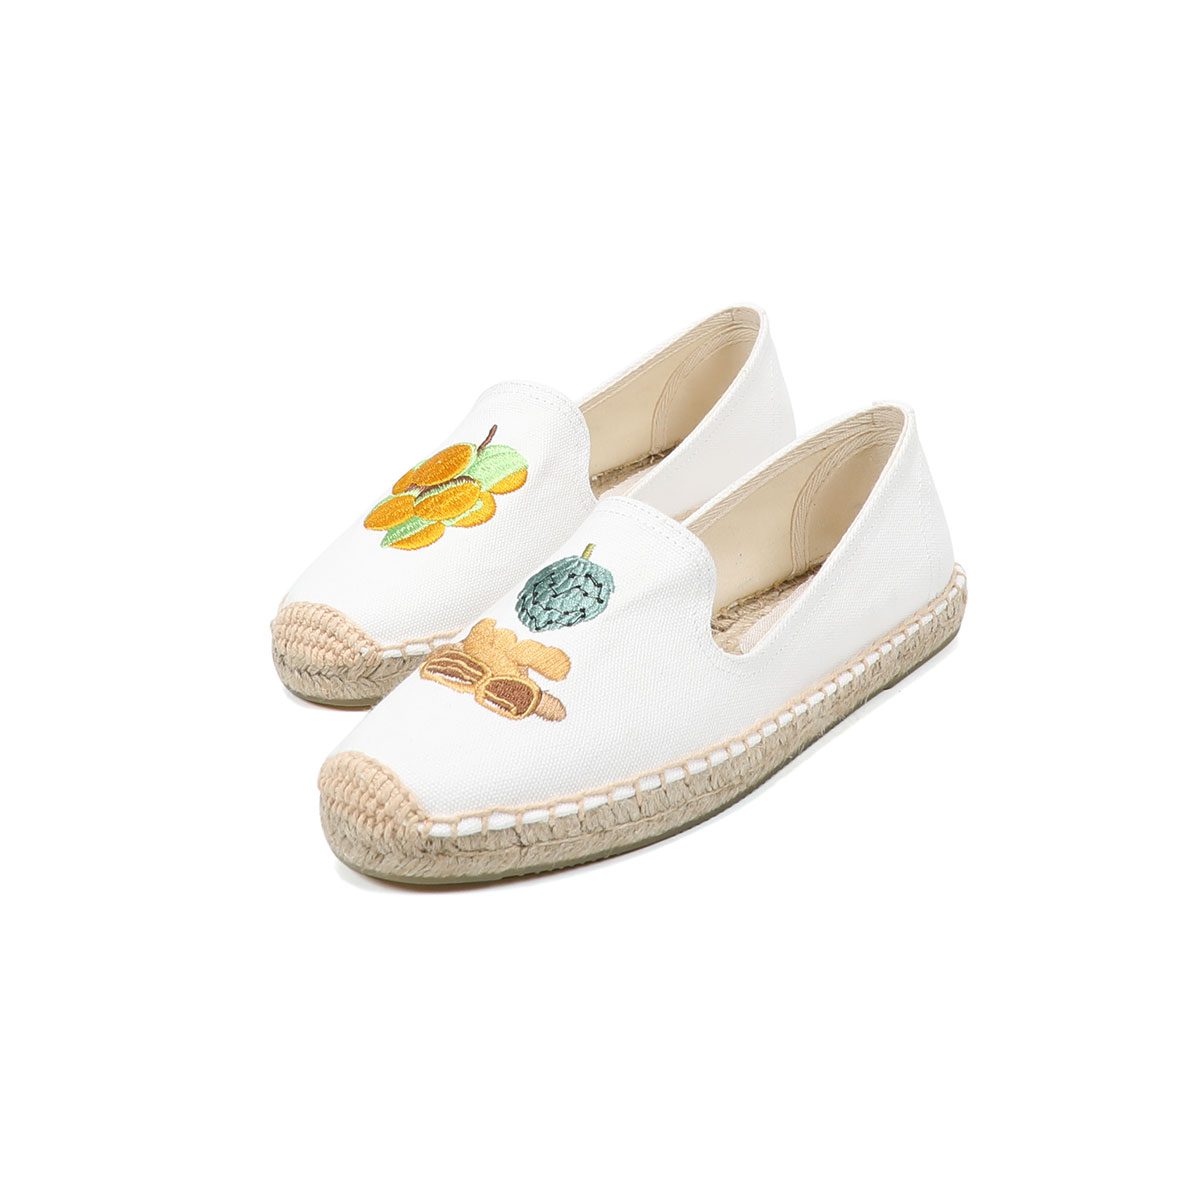 Summer fashion ladies all-match casual white shoes fruit pattern embroidered slip-on canvas shoes high-quality espadrilles